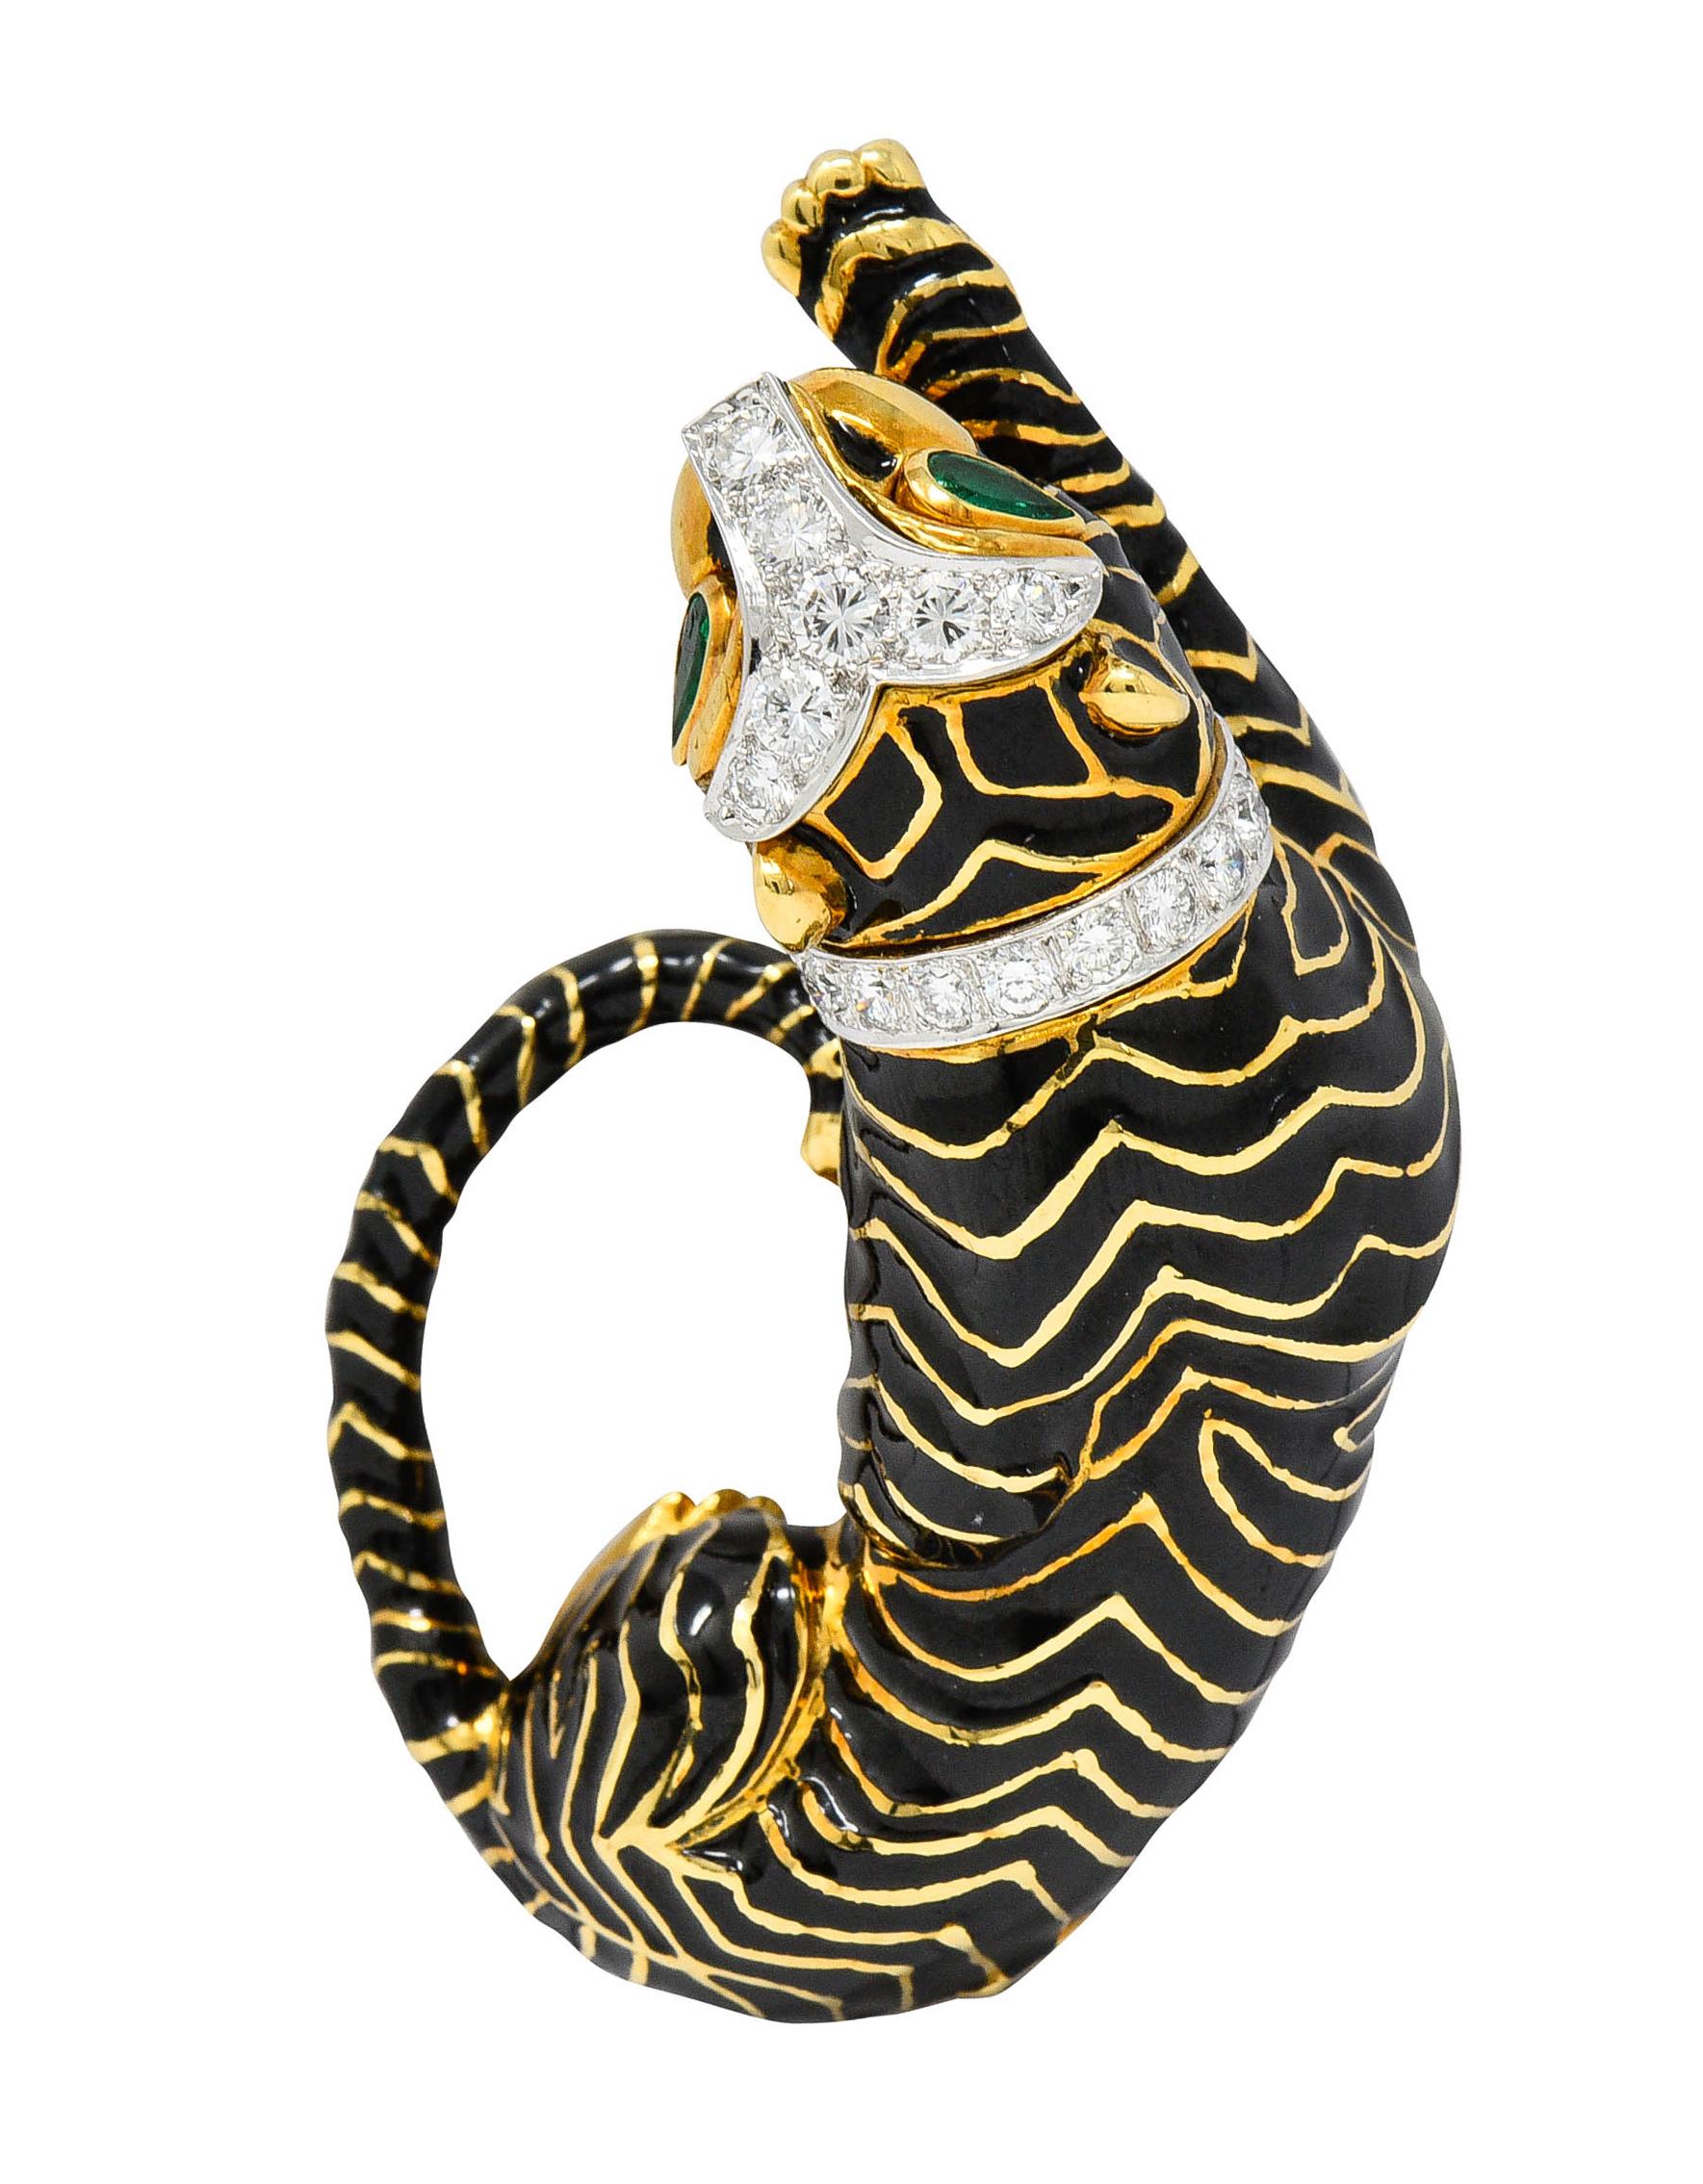 Statement brooch is designed as a languid tiger with an eager outstretched paw

Glossed with black enamel stripes that exhibit very minor loss

Its eyes are bezel set pear cut emeralds that weigh in total approximately 0.25 carat - bright